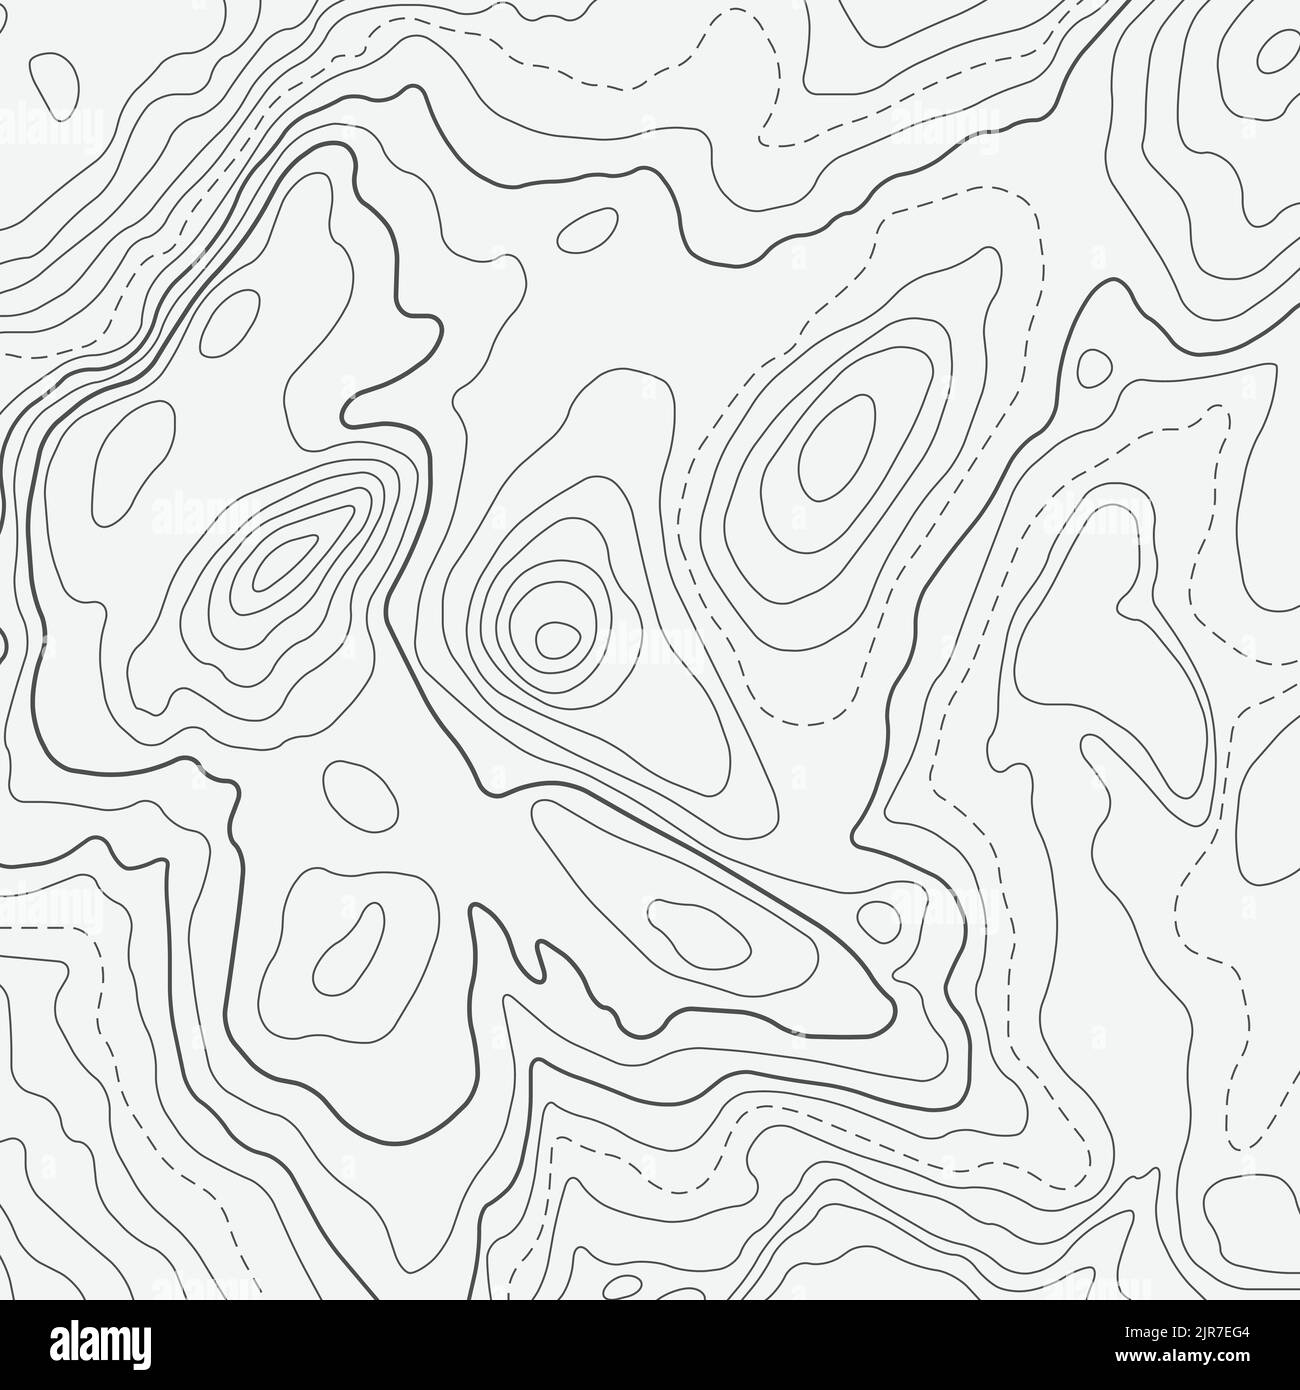 Abstract topographic map wallpaper Stock Vector